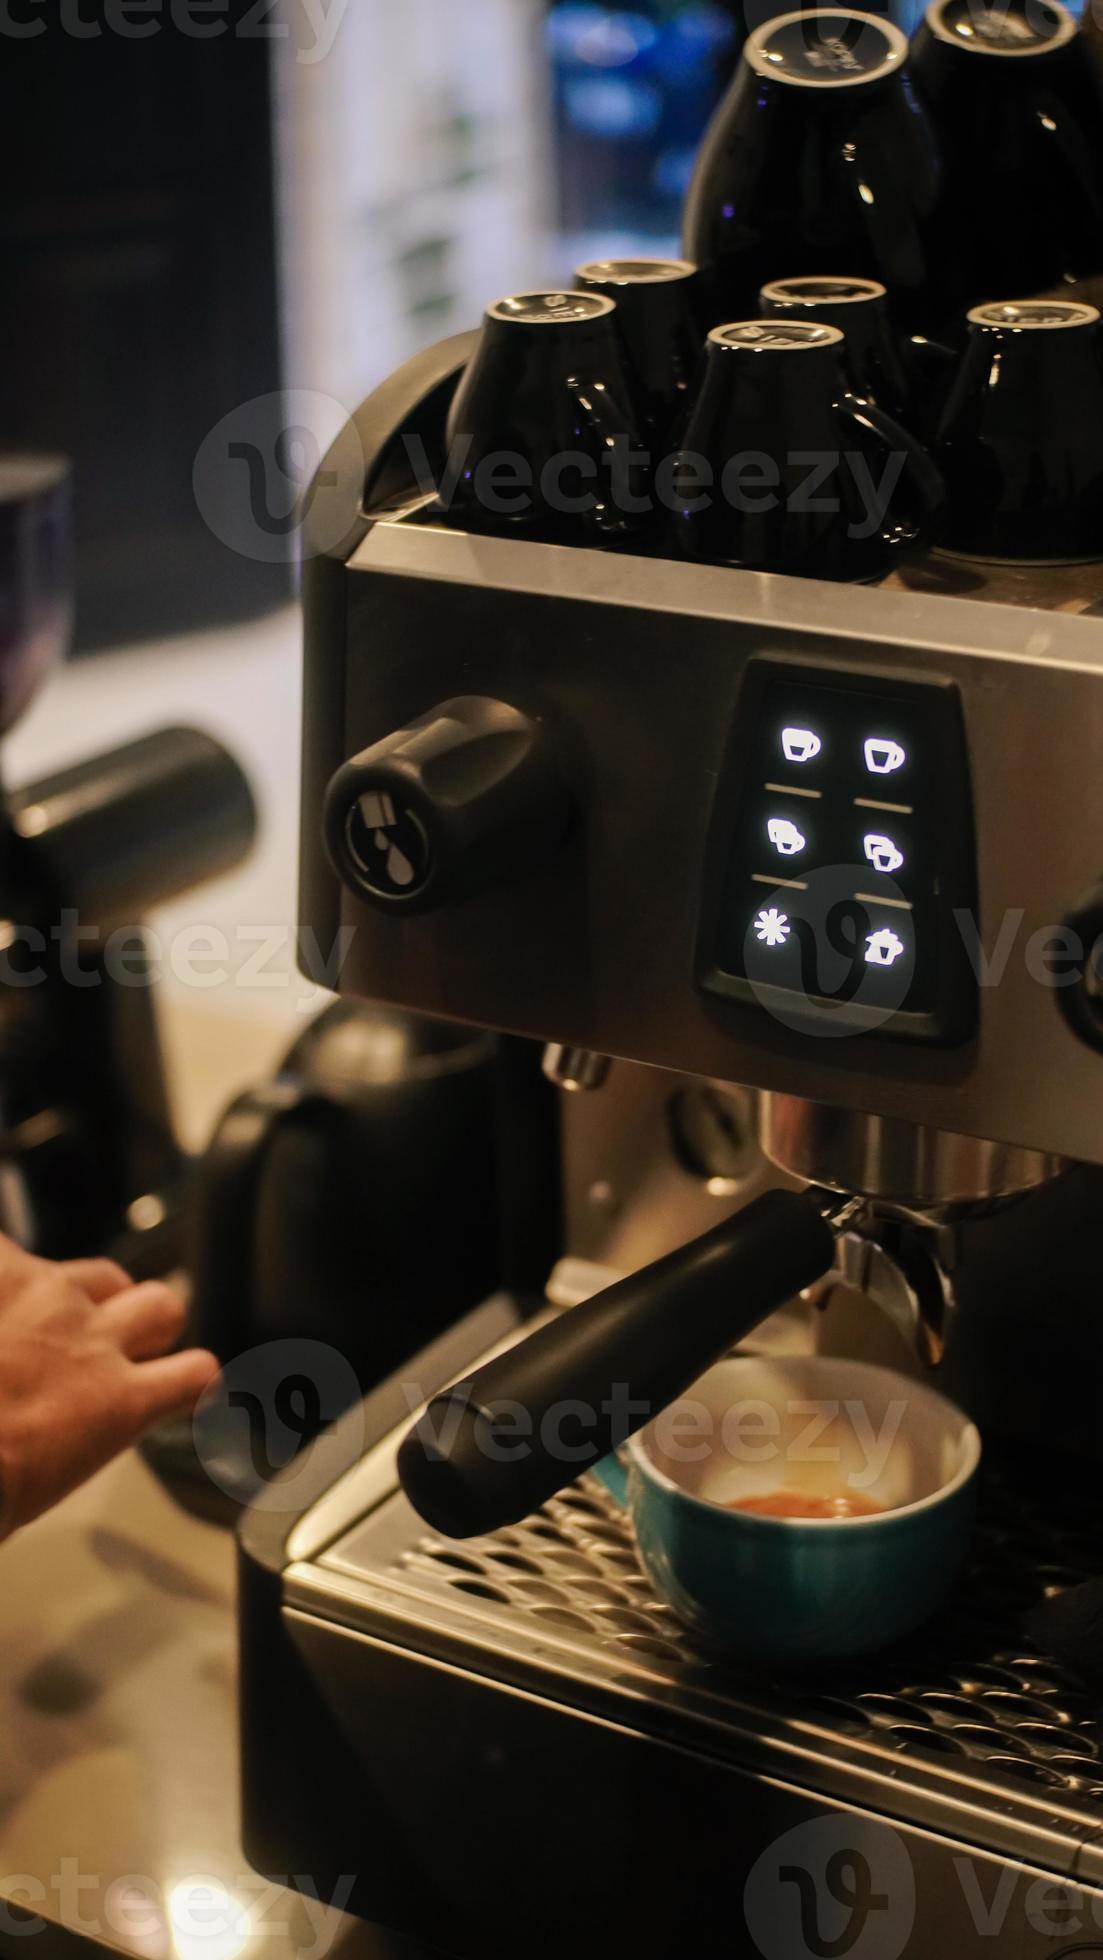 https://static.vecteezy.com/system/resources/previews/004/524/090/large_2x/cappuccino-making-machine-photo.jpg